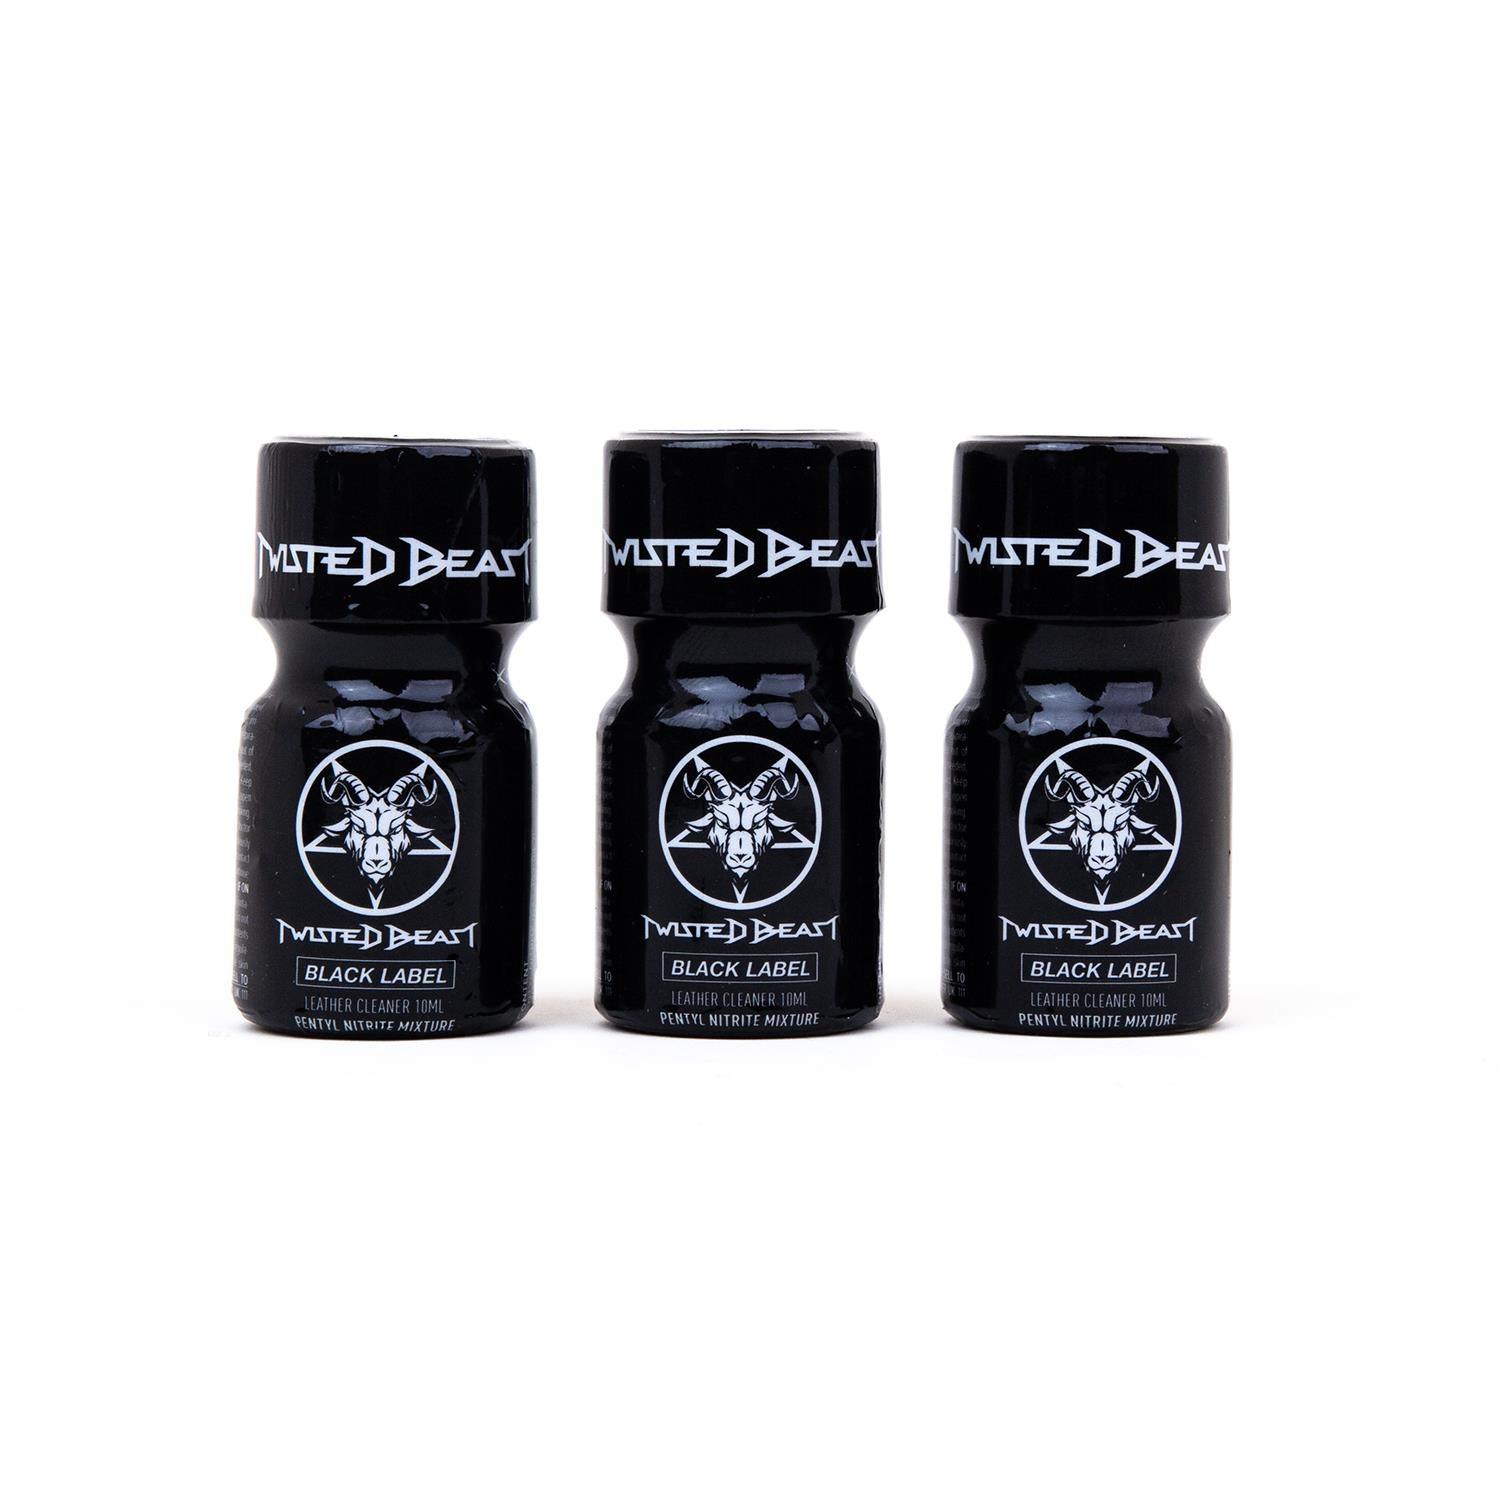 Twisted Beast Black Label, 10ml, 3-Pack by Twisted Beast